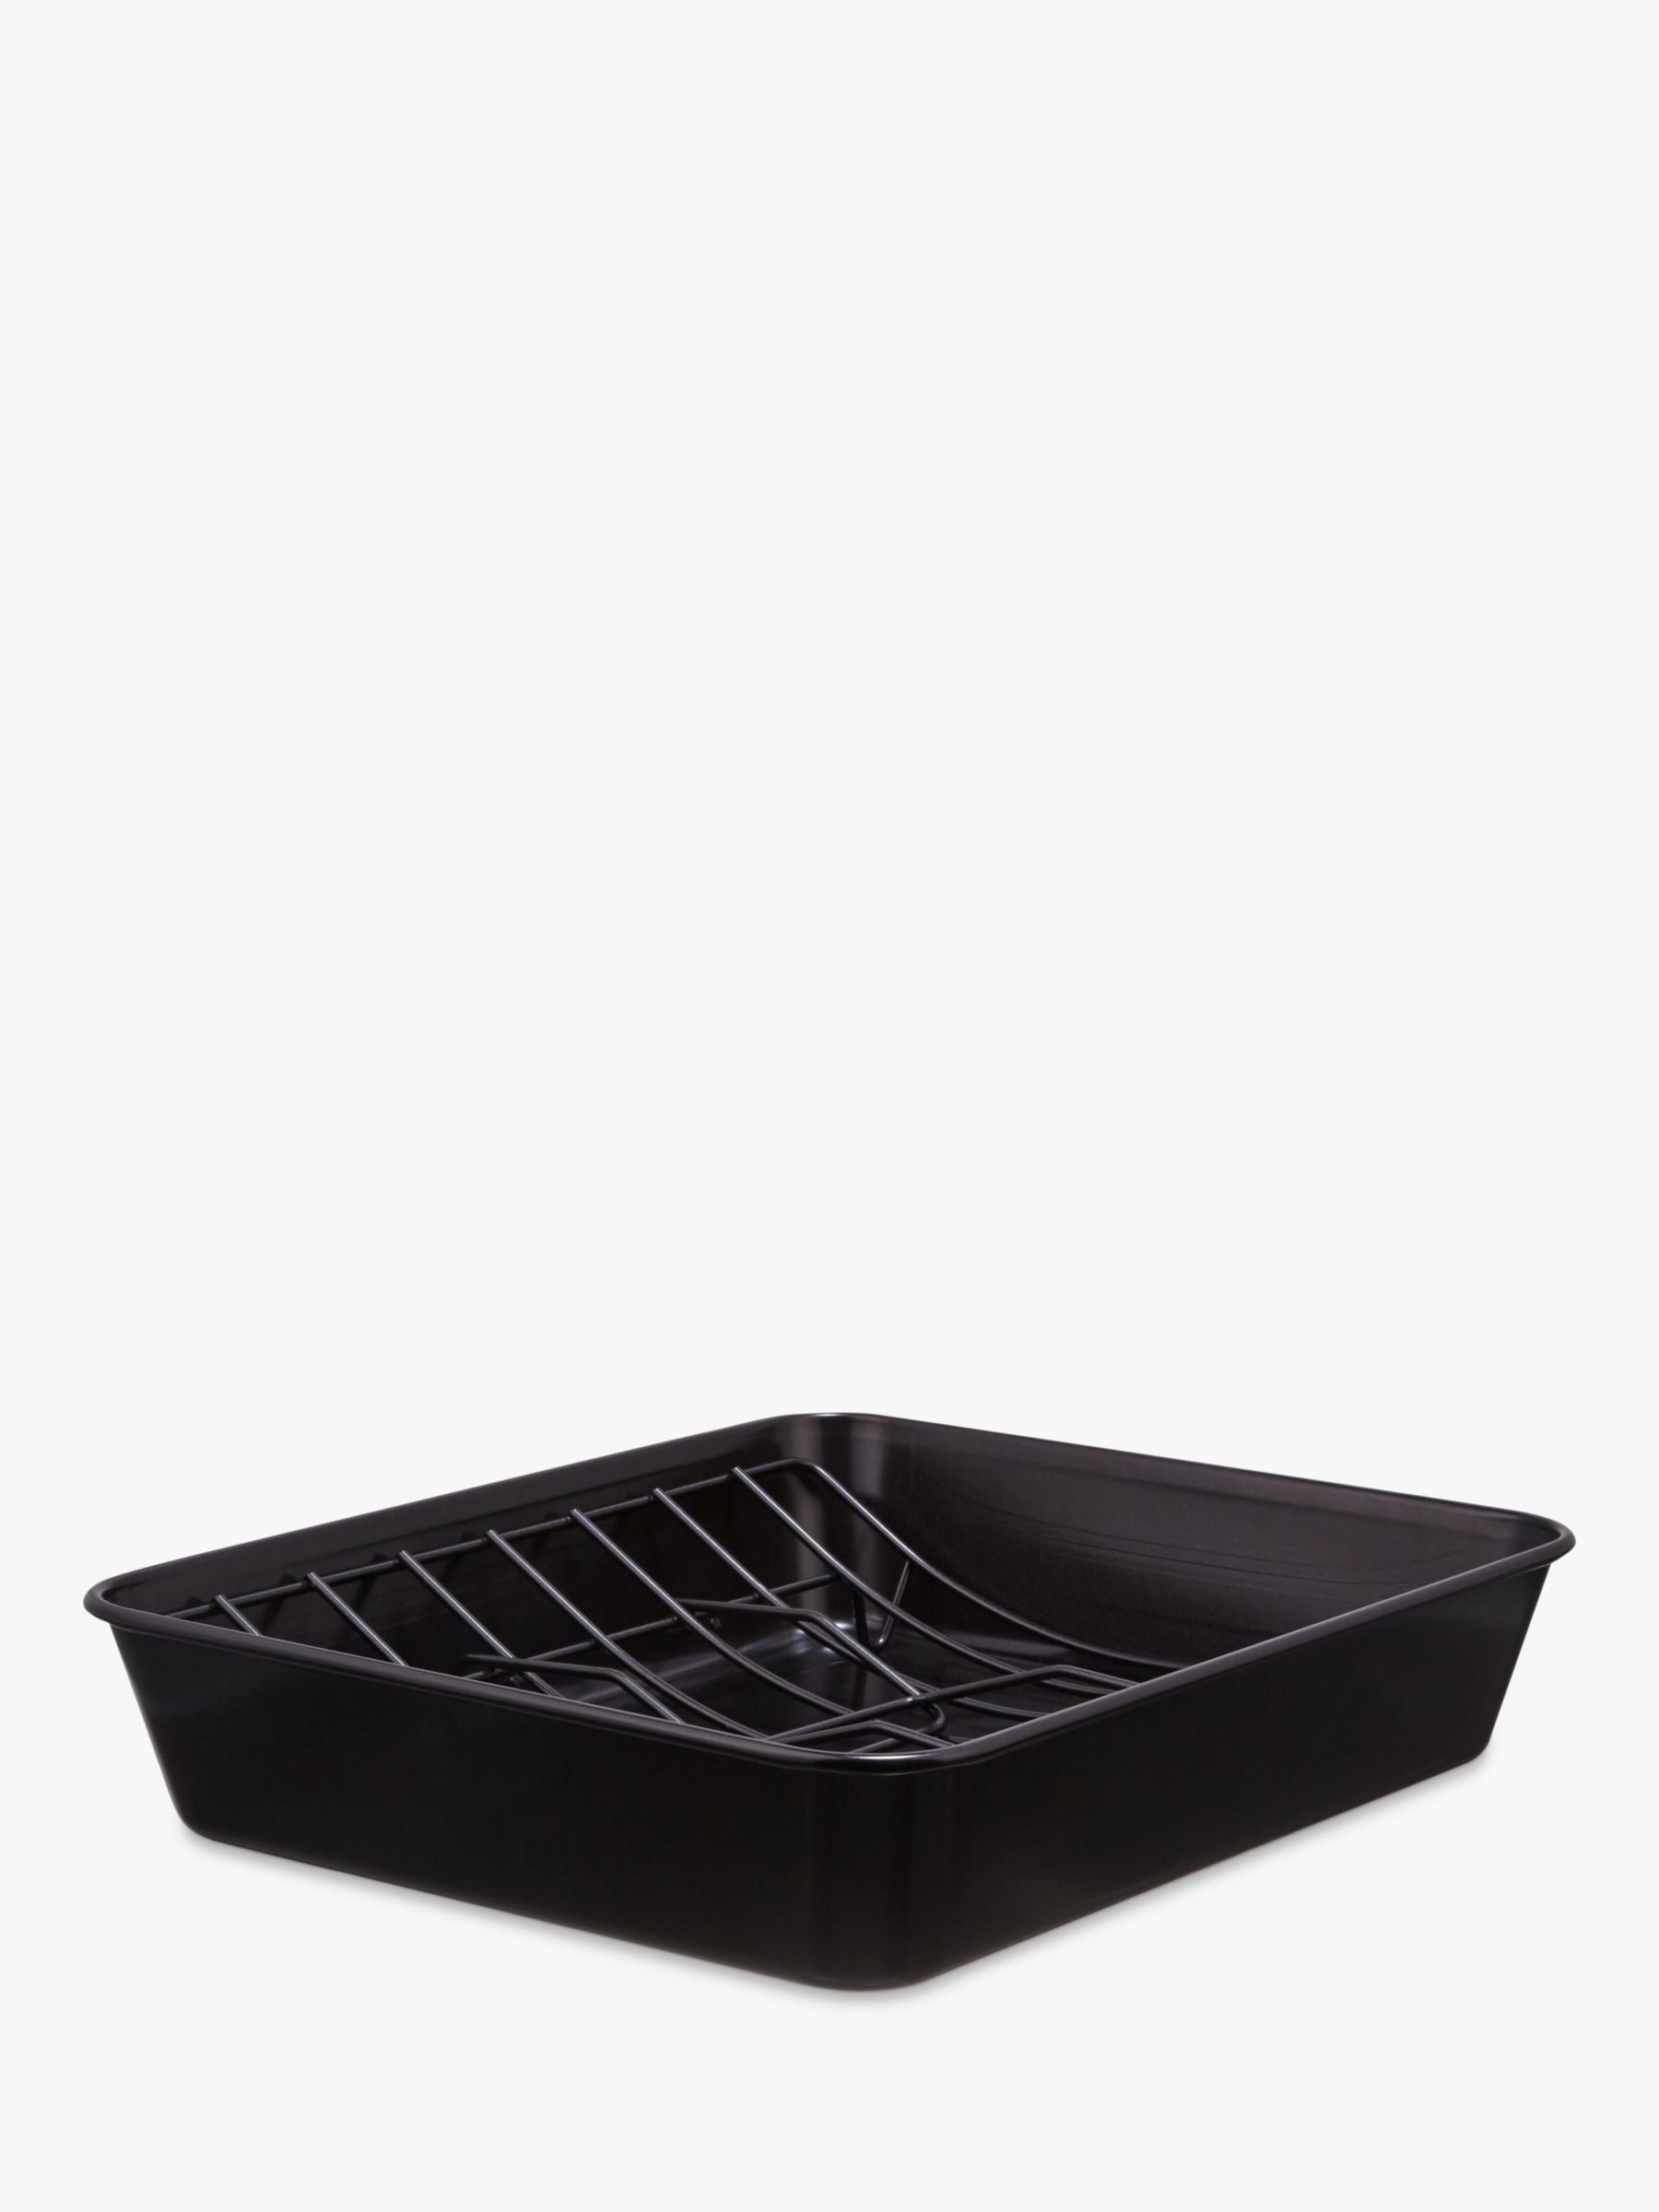 John Lewis & Partners Professional Non-Stick Roaster with Rack